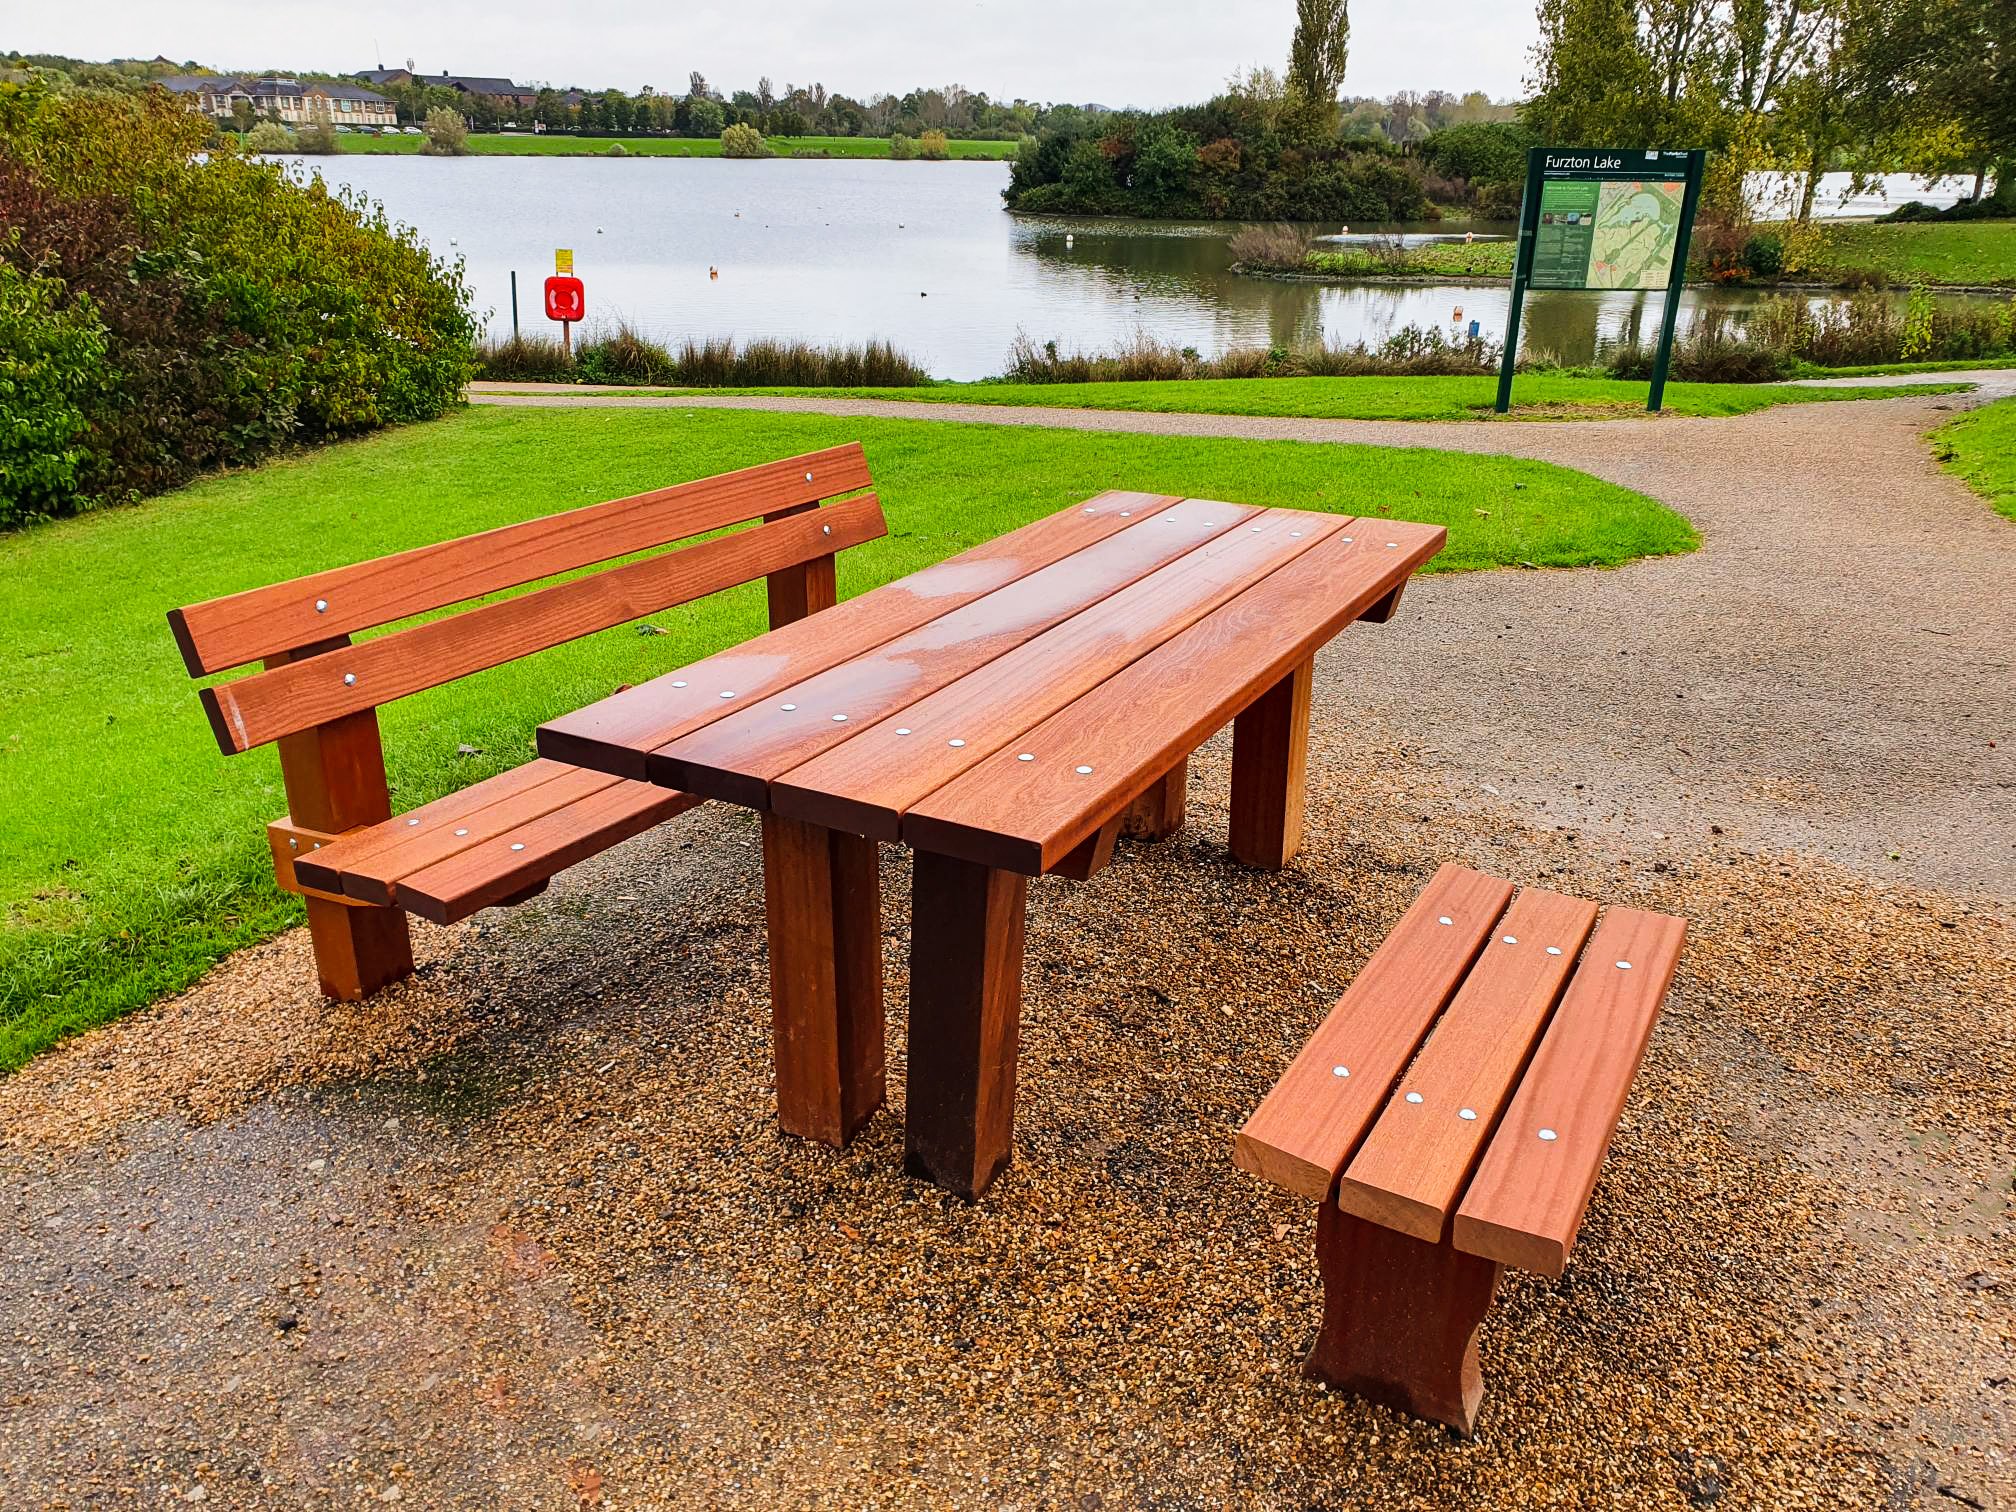 Making the parks across Milton Keynes more accessible